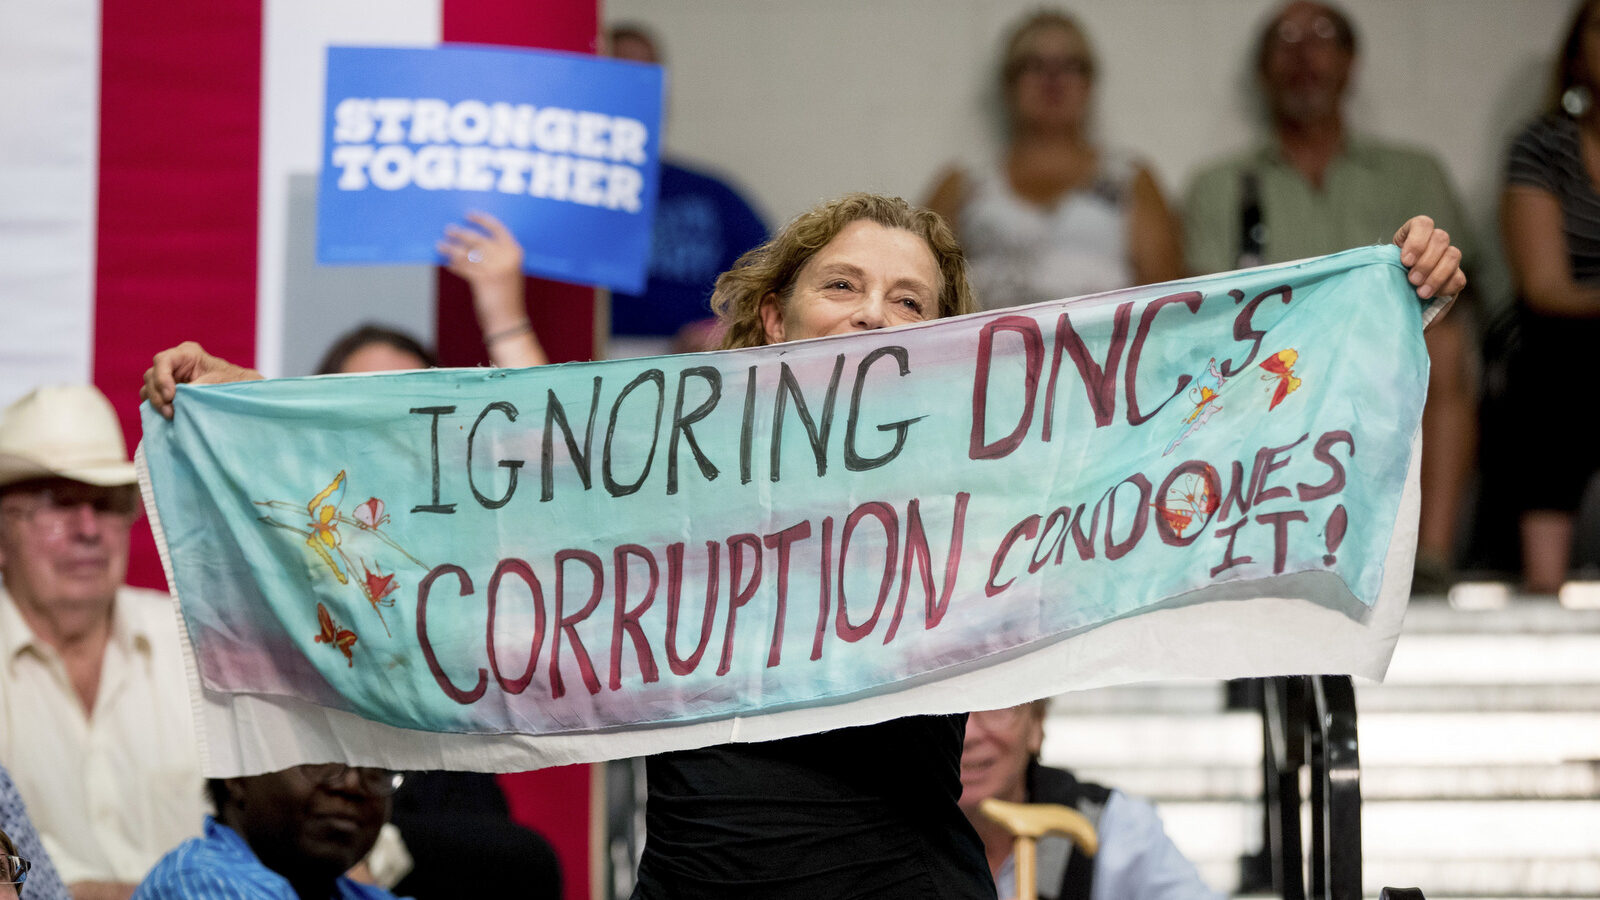 A woman in the audience hold up fabric that reads "Ignoring DNC's Corruption Condones It!" as Democratic presidential candidate Hillary Clinton speaks at a rally at Adams City High School in Commerce City, Colo., Wednesday, Aug. 3, 2016. (AP Photo/Andrew Harnik)